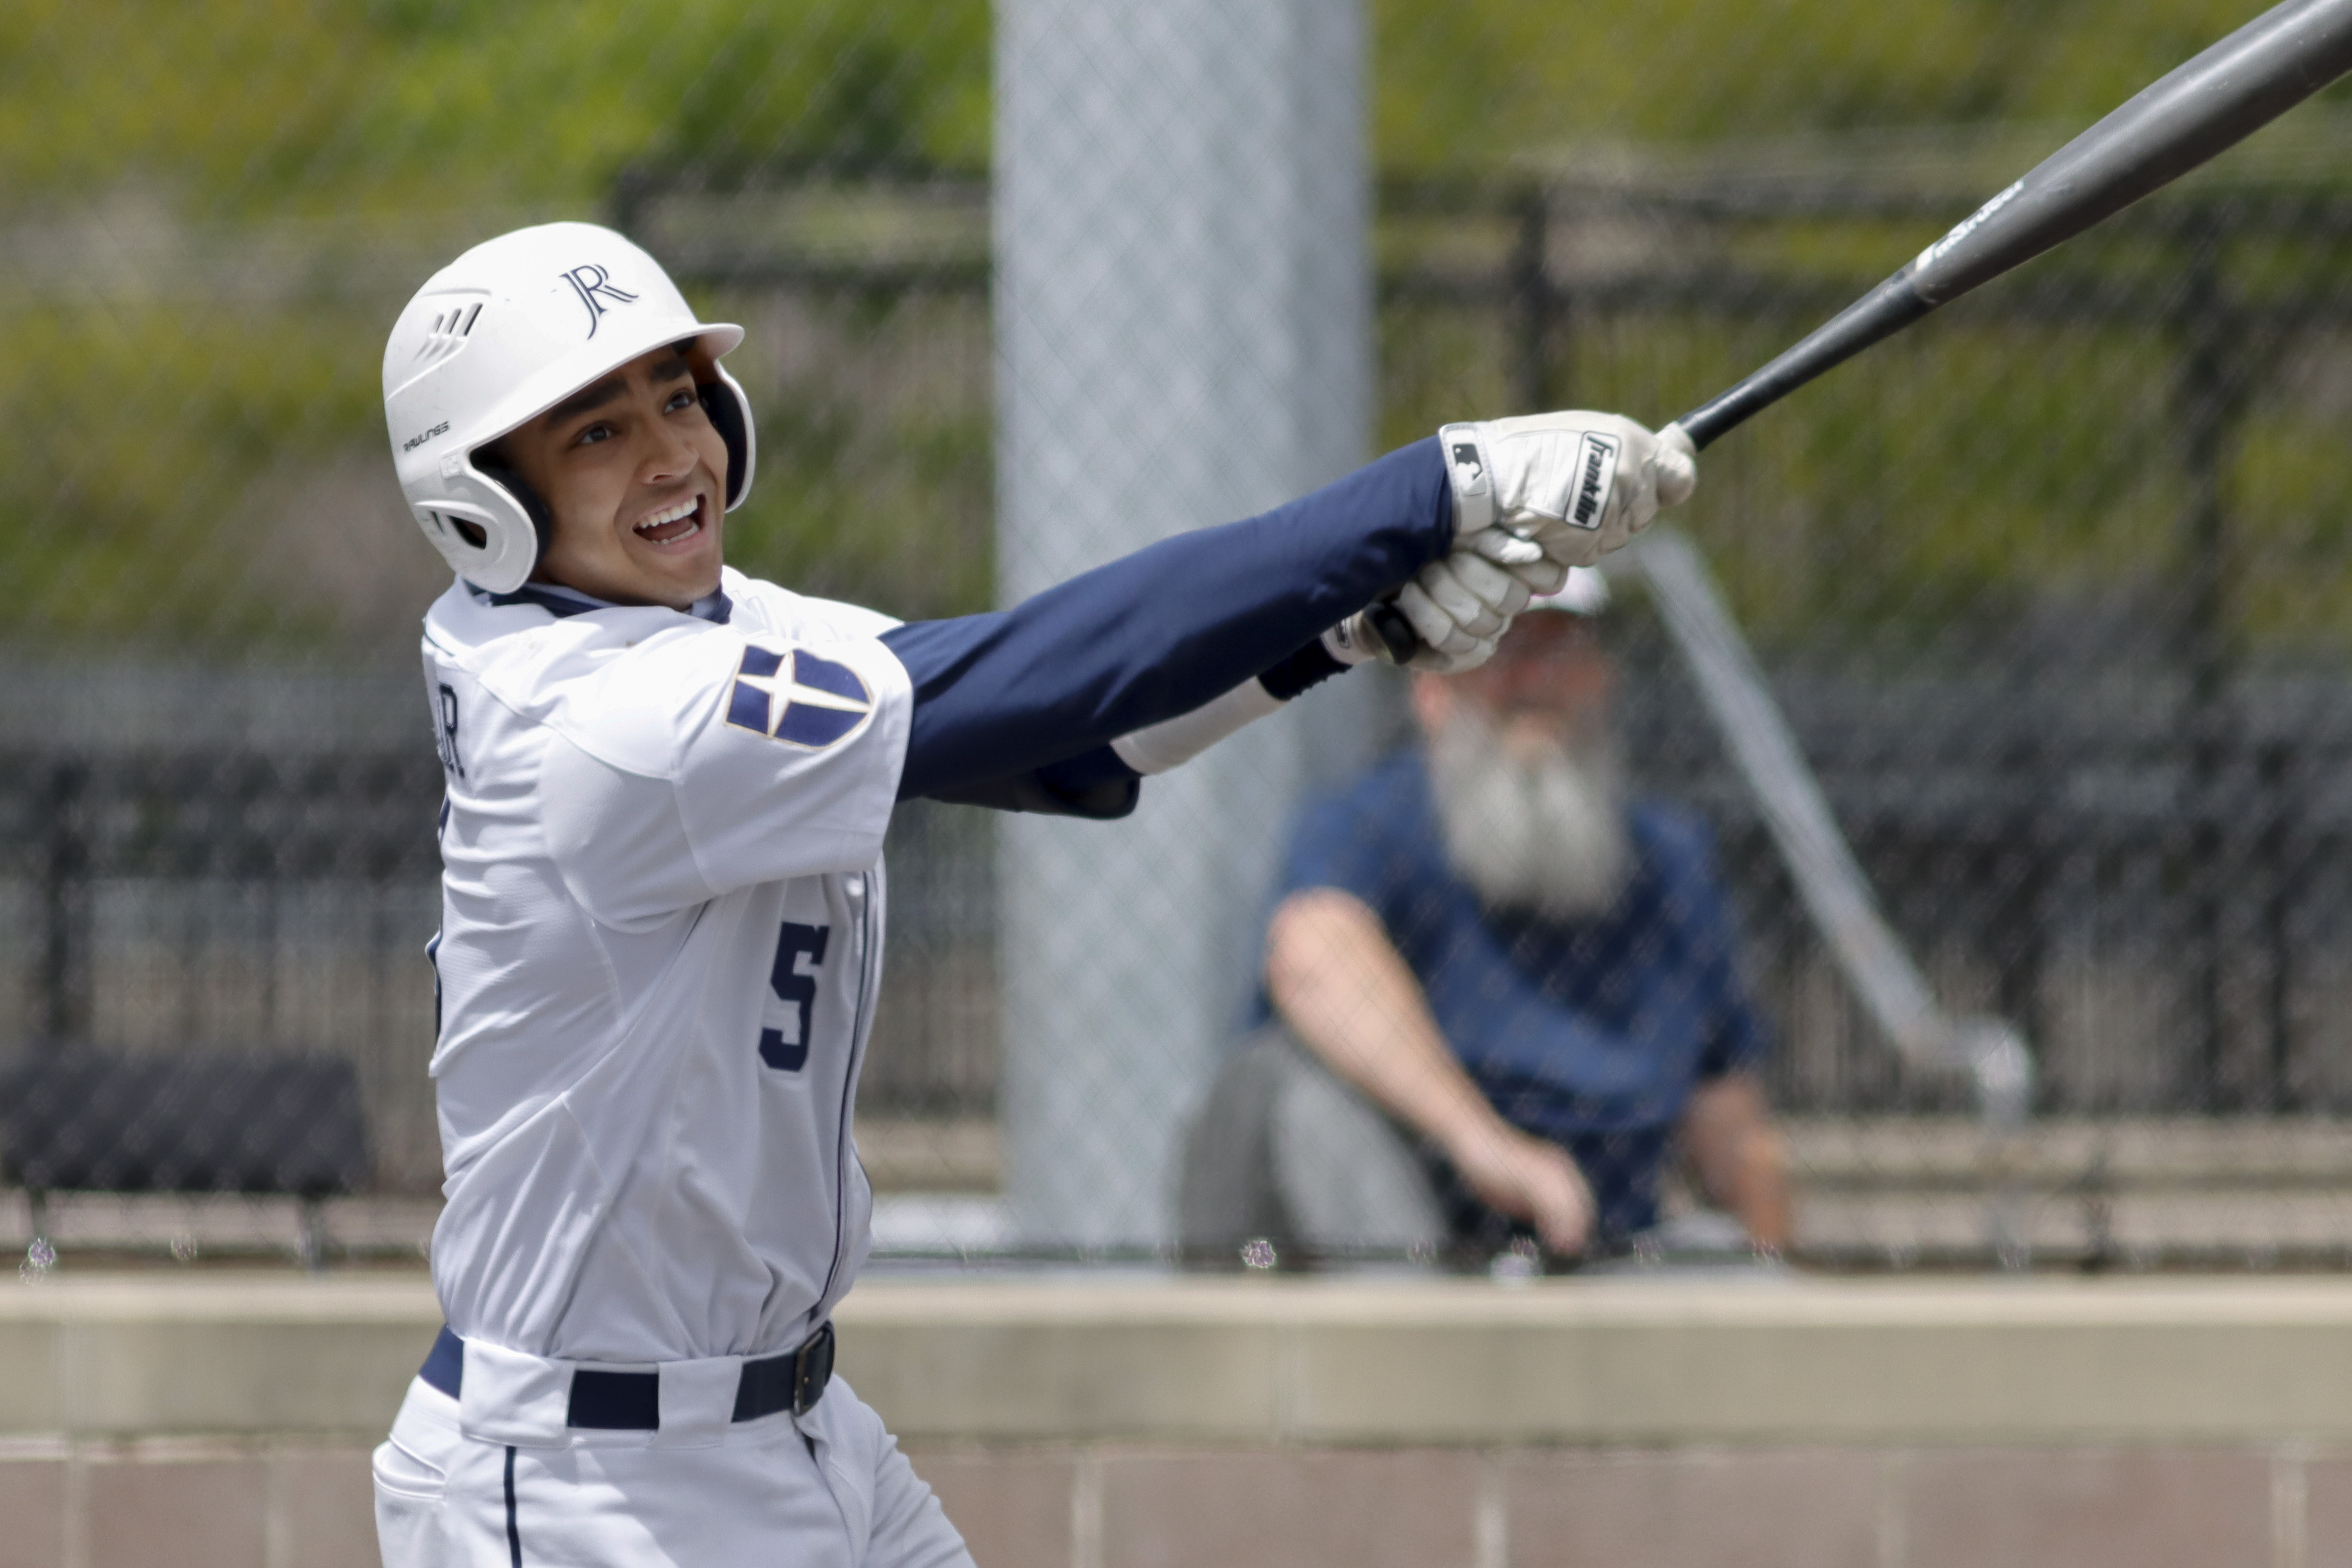 Jesuit's Jordan Lawlar appears destined to be a top 5 MLB draft pick. Will  he be selected by his hometown Texas Rangers?